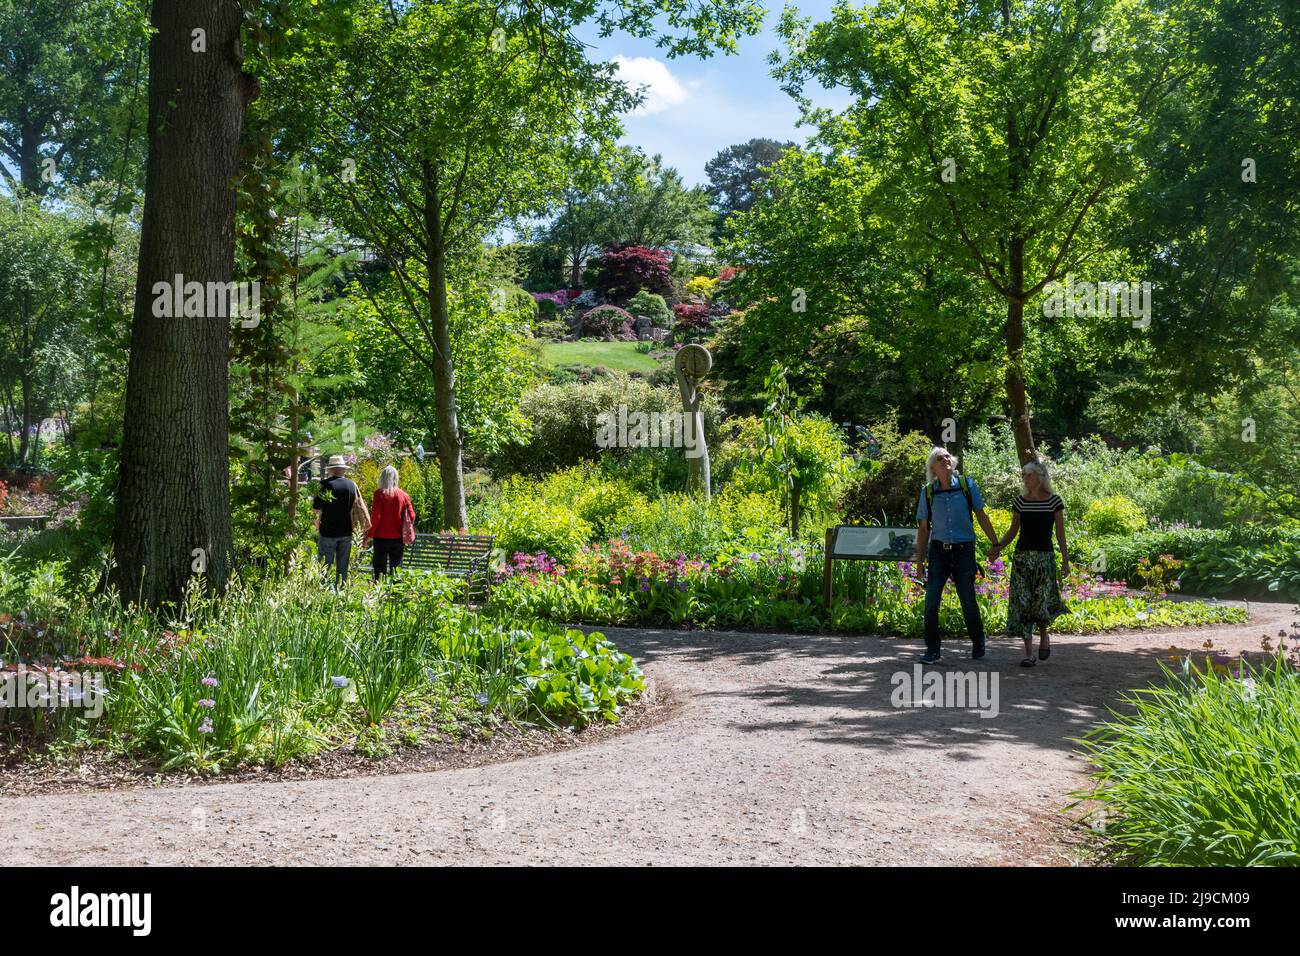 RHS Wisley Garden view, the Oakwood area or wild garden during May or late spring, Surrey, England, UK Stock Photo